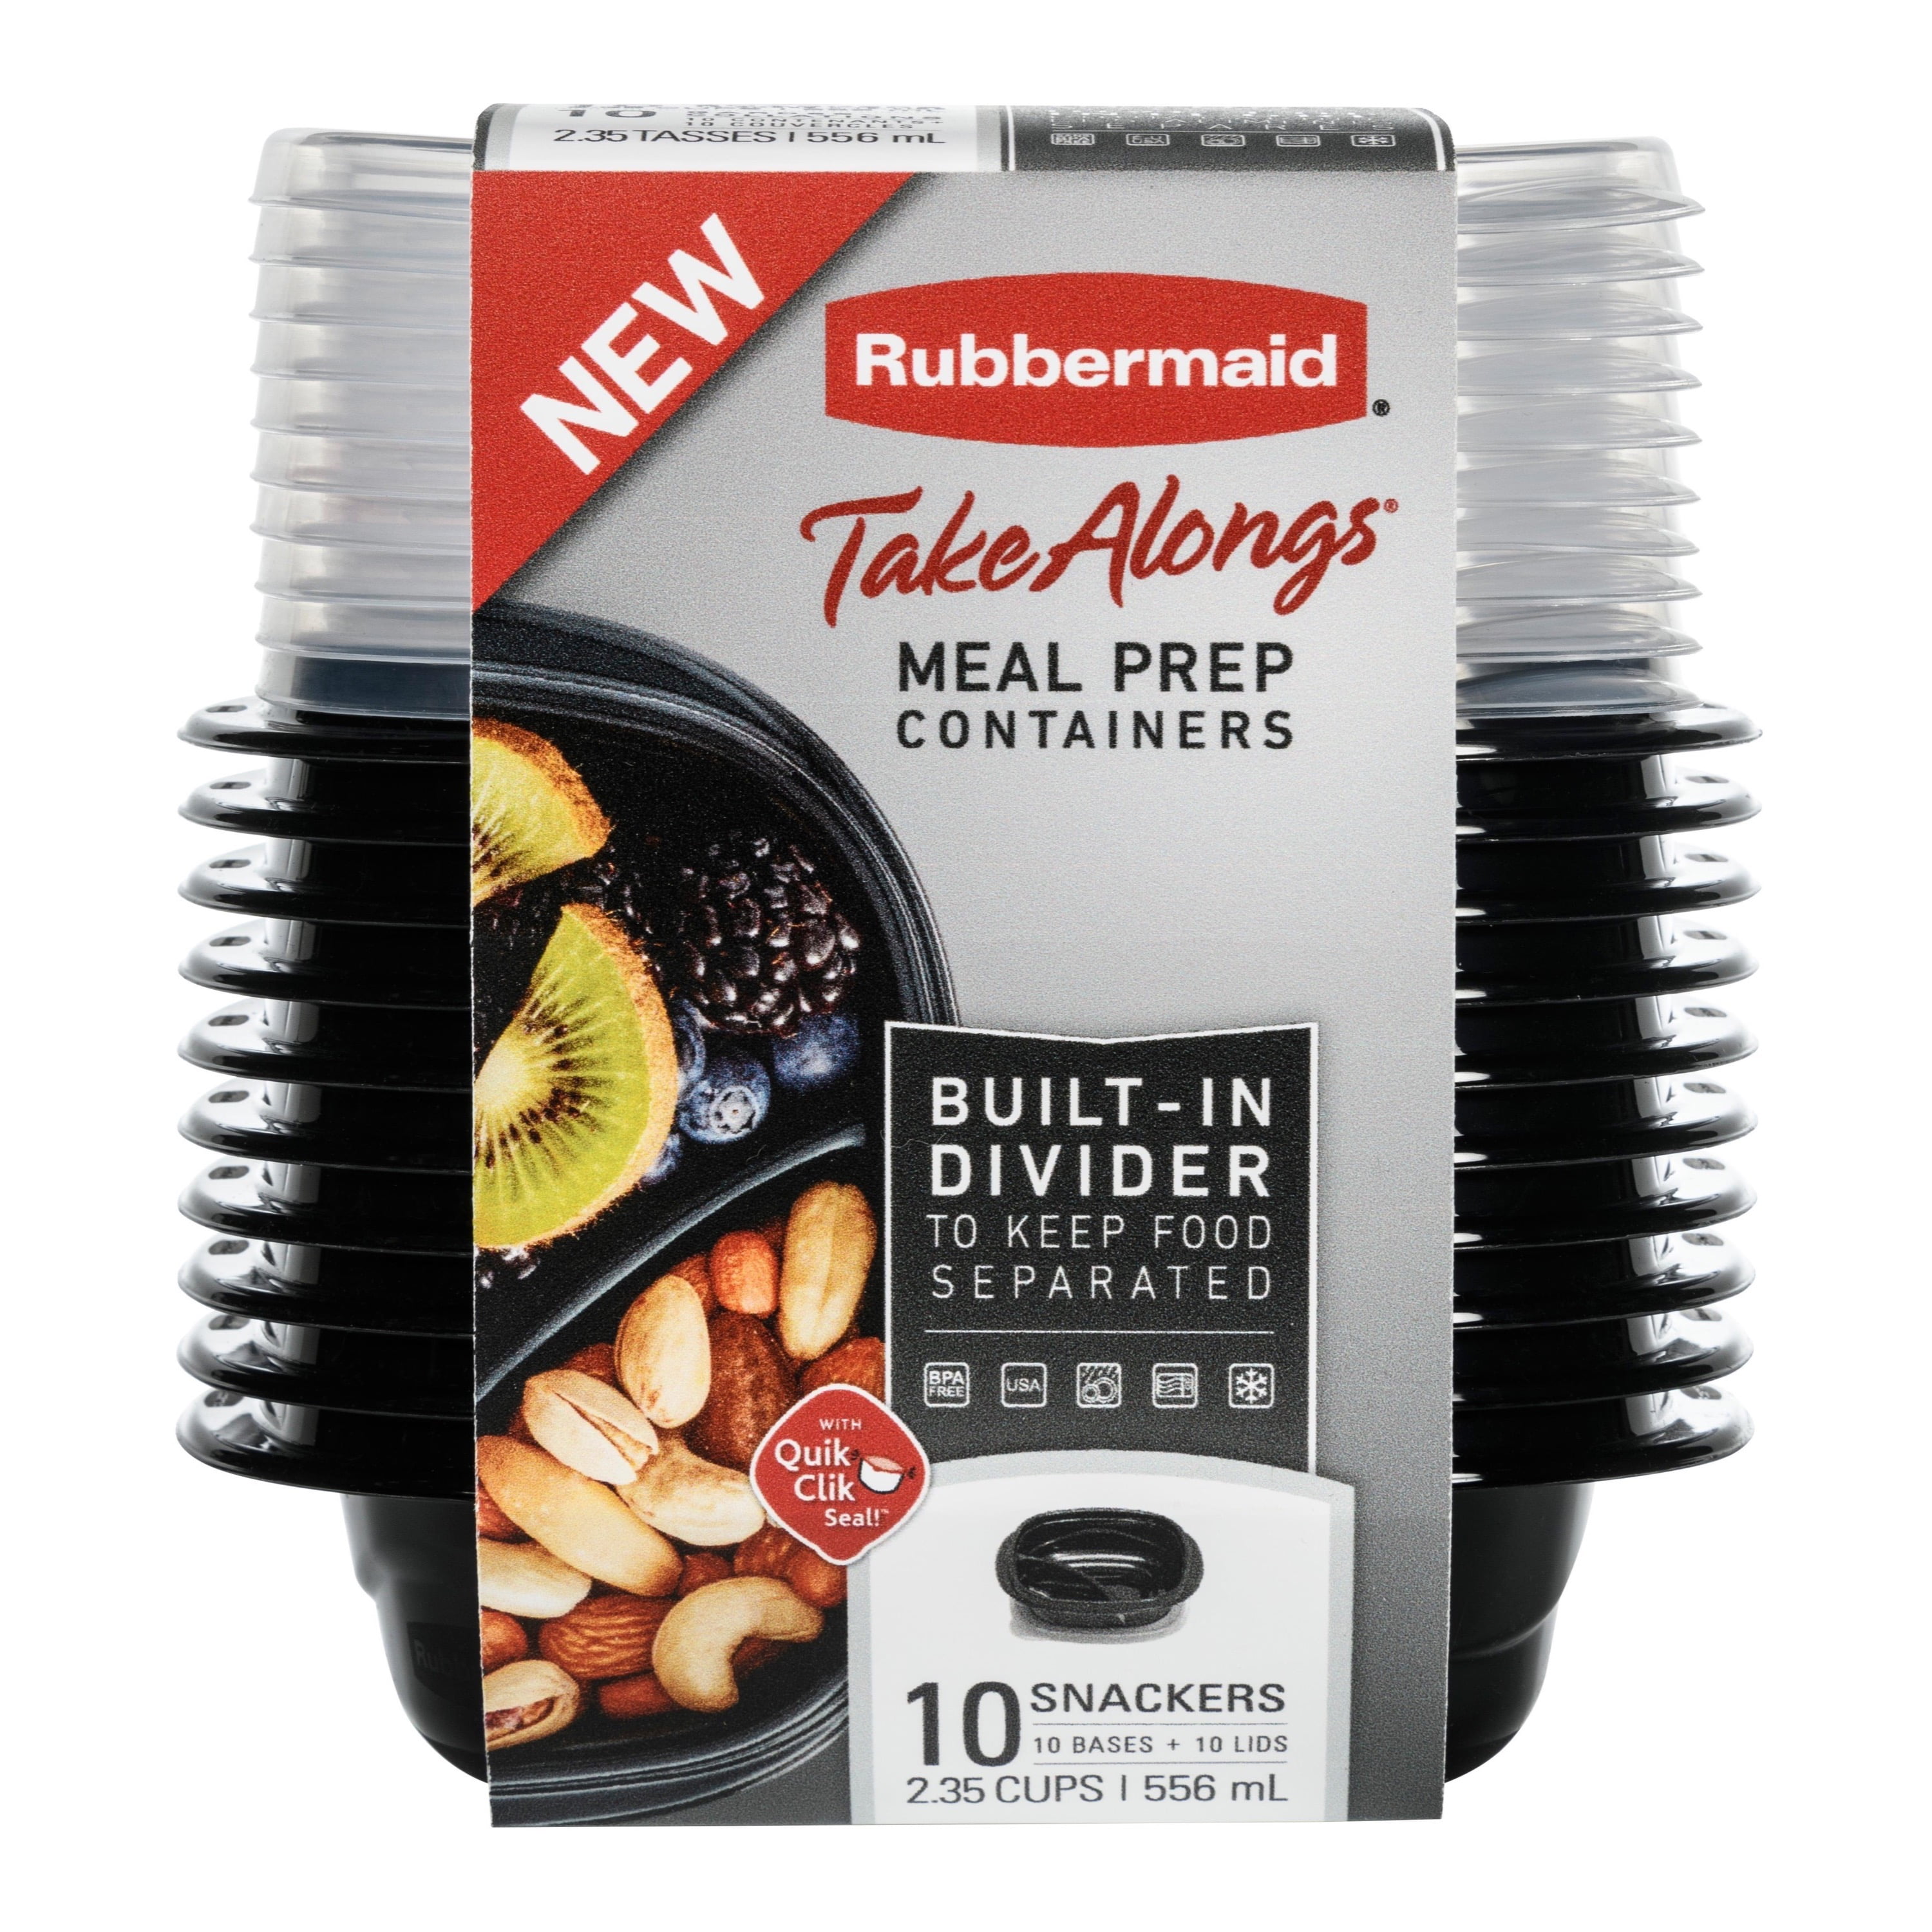  Rubbermaid TakeAlongs Divided Snacking Food Storage Containers,  2.2 Cup, Tint Chili, 3 Count: Food Storage Containers: Home & Kitchen